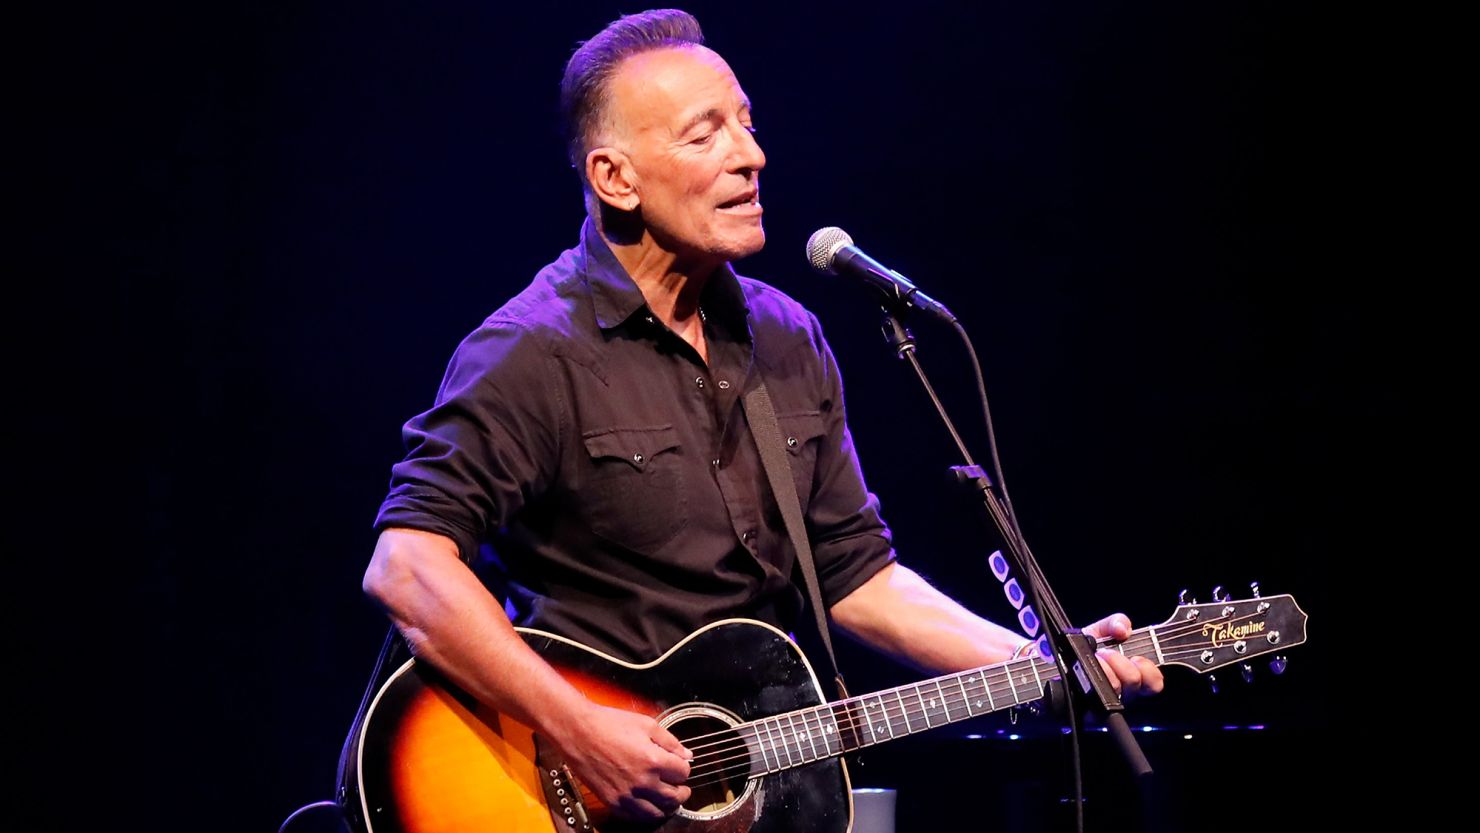 Bruce Springsteen performs during the reopening night of "Springsteen on Broadway" for a full-capacity, vaccinated audience at St. James Theatre in New York City.